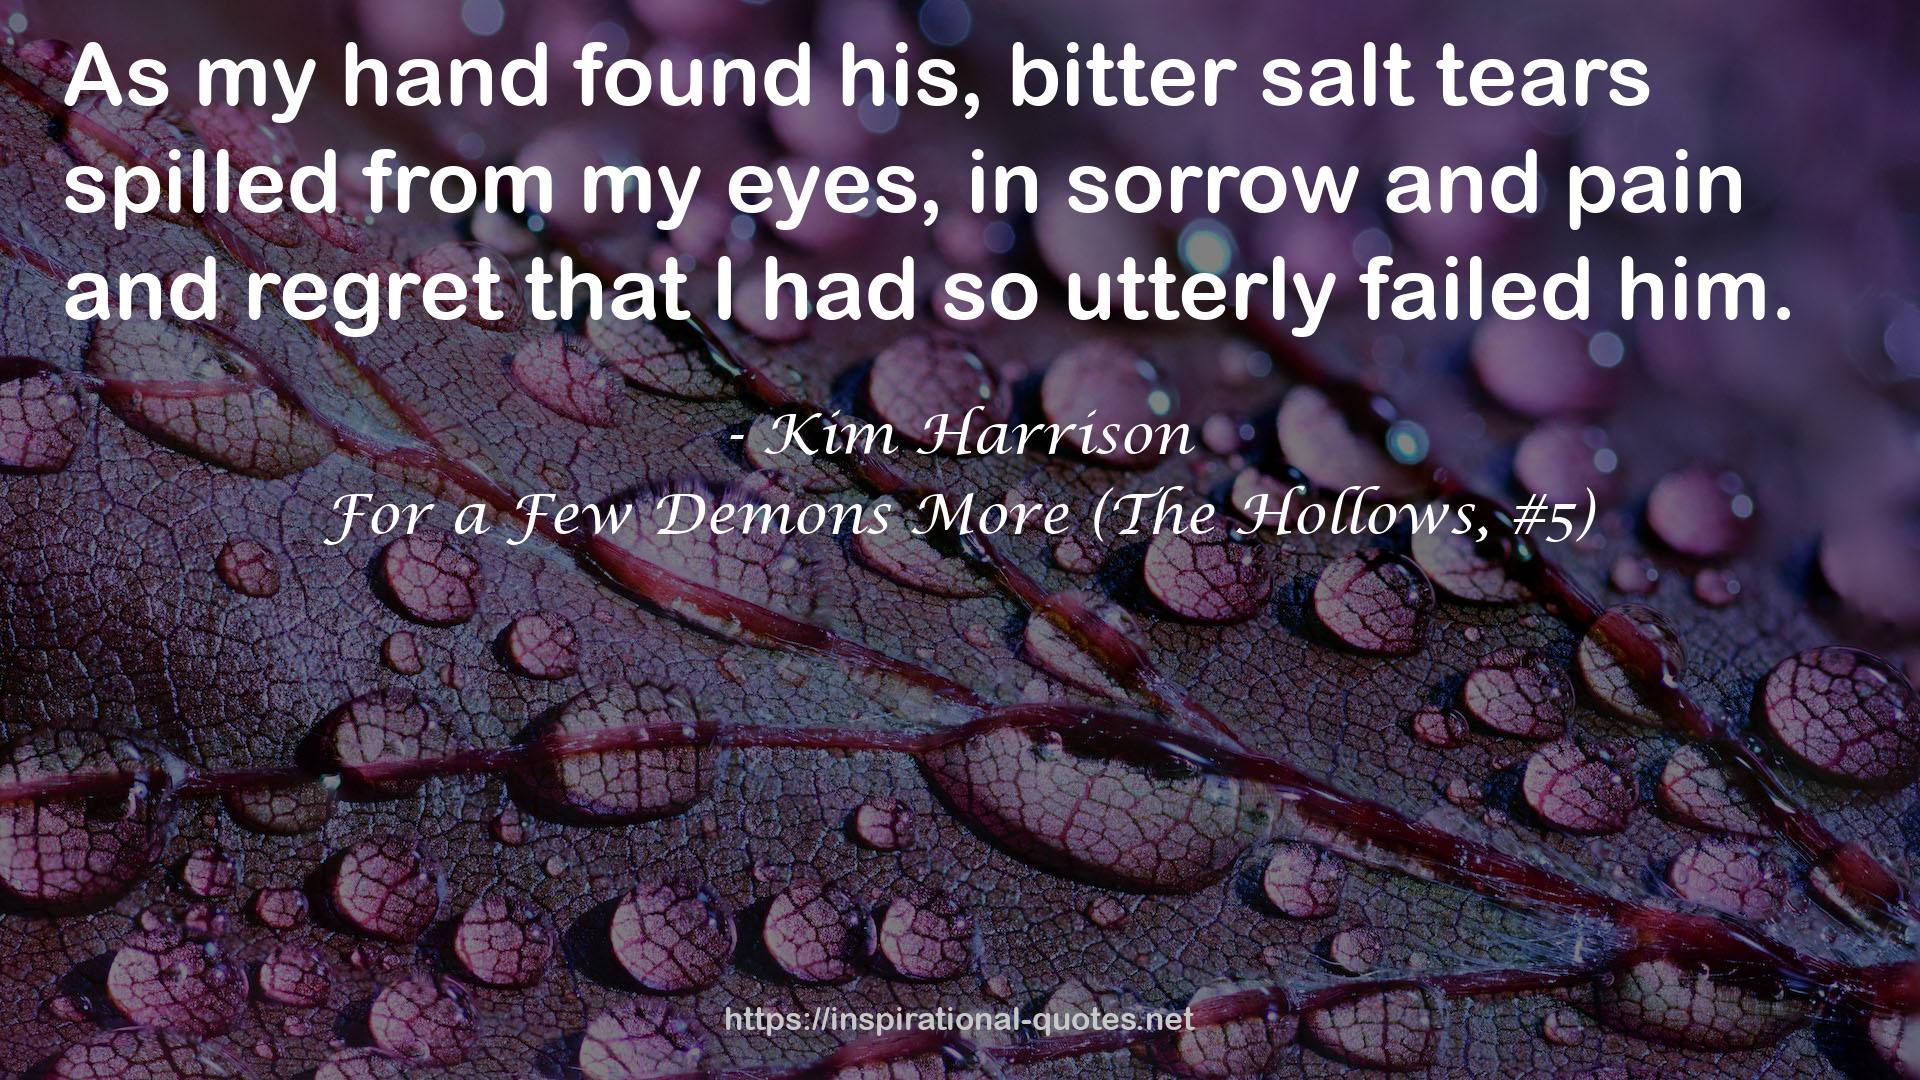 For a Few Demons More (The Hollows, #5) QUOTES